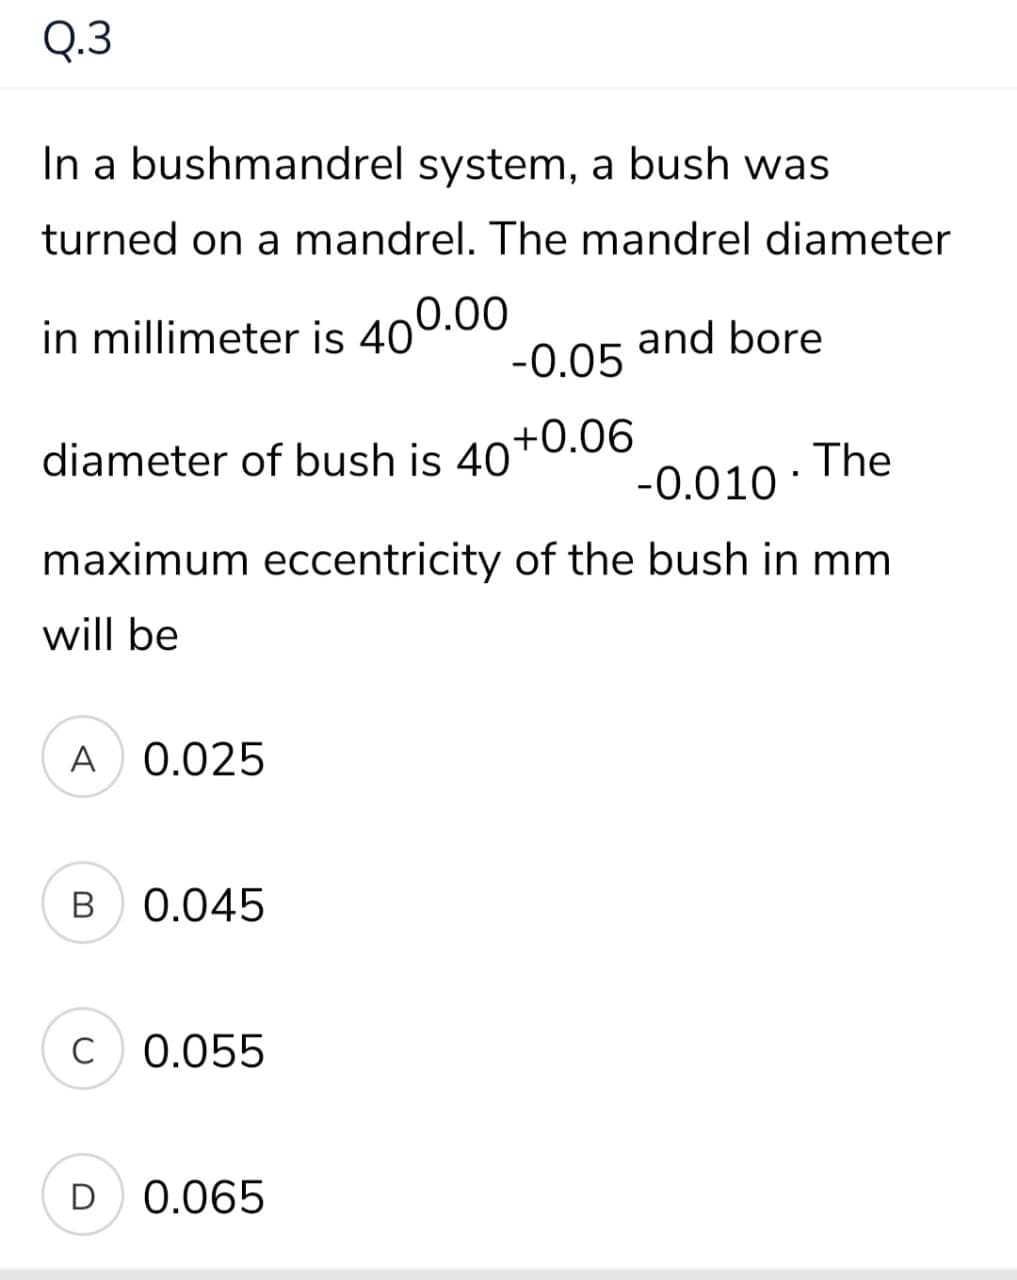 Q.3
In a bushmandrel system, a bush was
turned on a mandrel. The mandrel diameter
in millimeter is 400.00
-0.05
and bore
diameter of bush is 40+0.06
The
-0.010
maximum eccentricity of the bush in mm
will be
A 0.025
0.045
C
0.055
D 0.065
